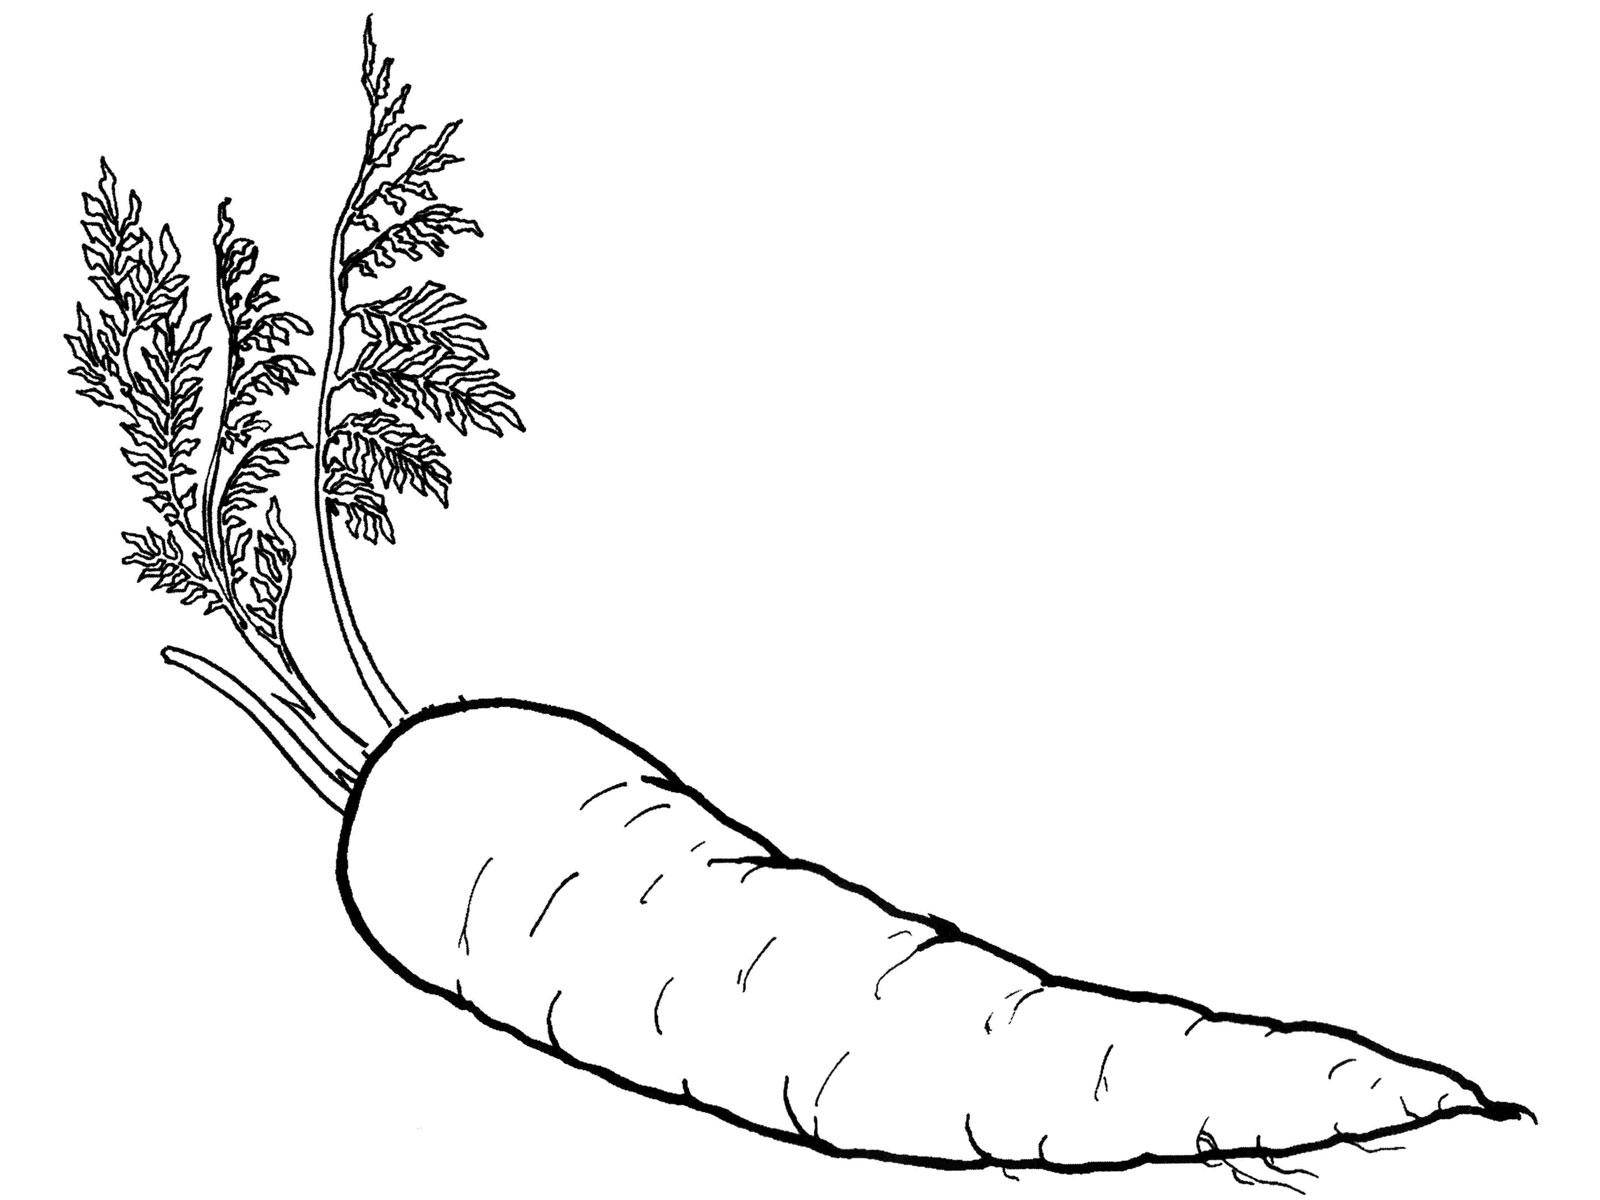 Coloring Carrot. Category vegetables. Tags:  carrot.